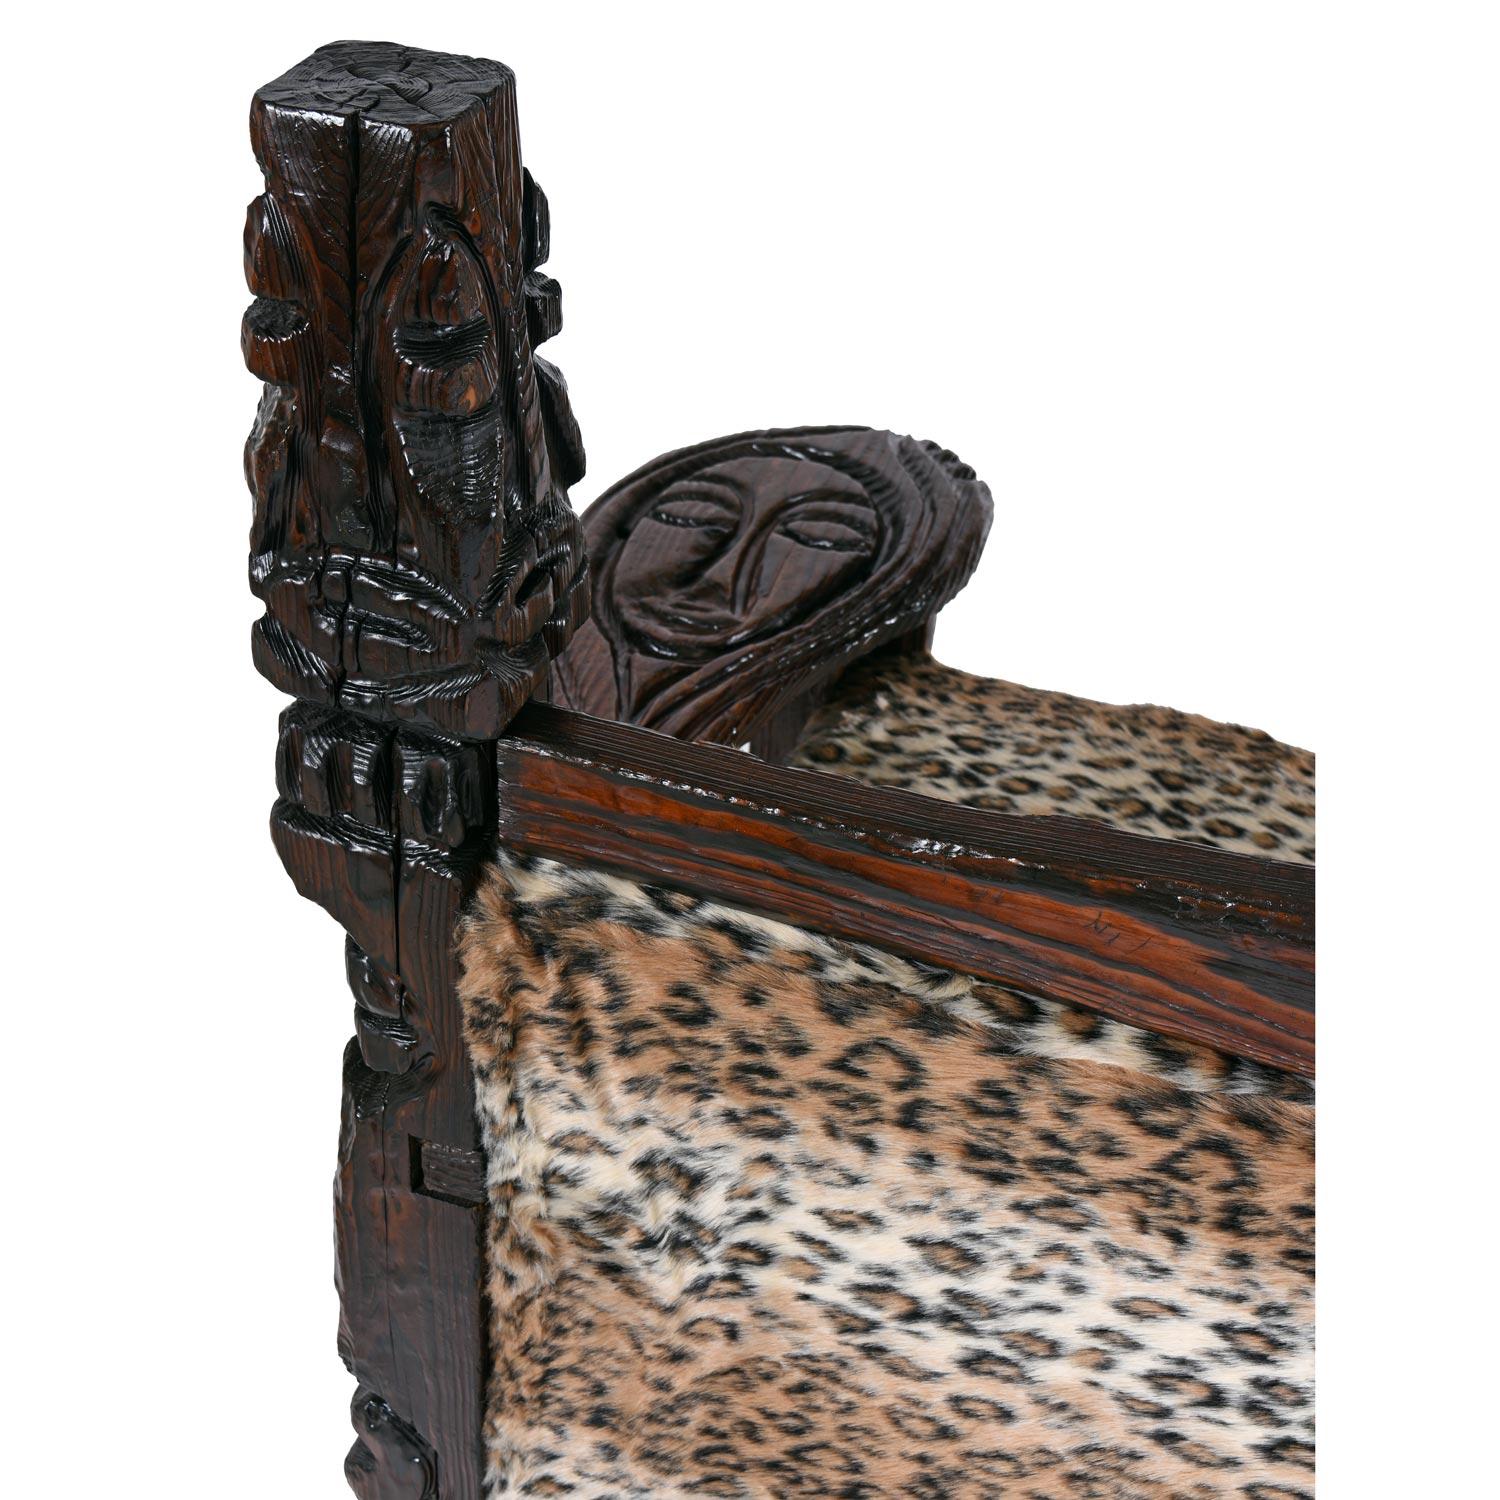 Jungle Room Faux Leopard Fur Hand Carved Paddle Arm Witco Tiki Thrown Sofa 3